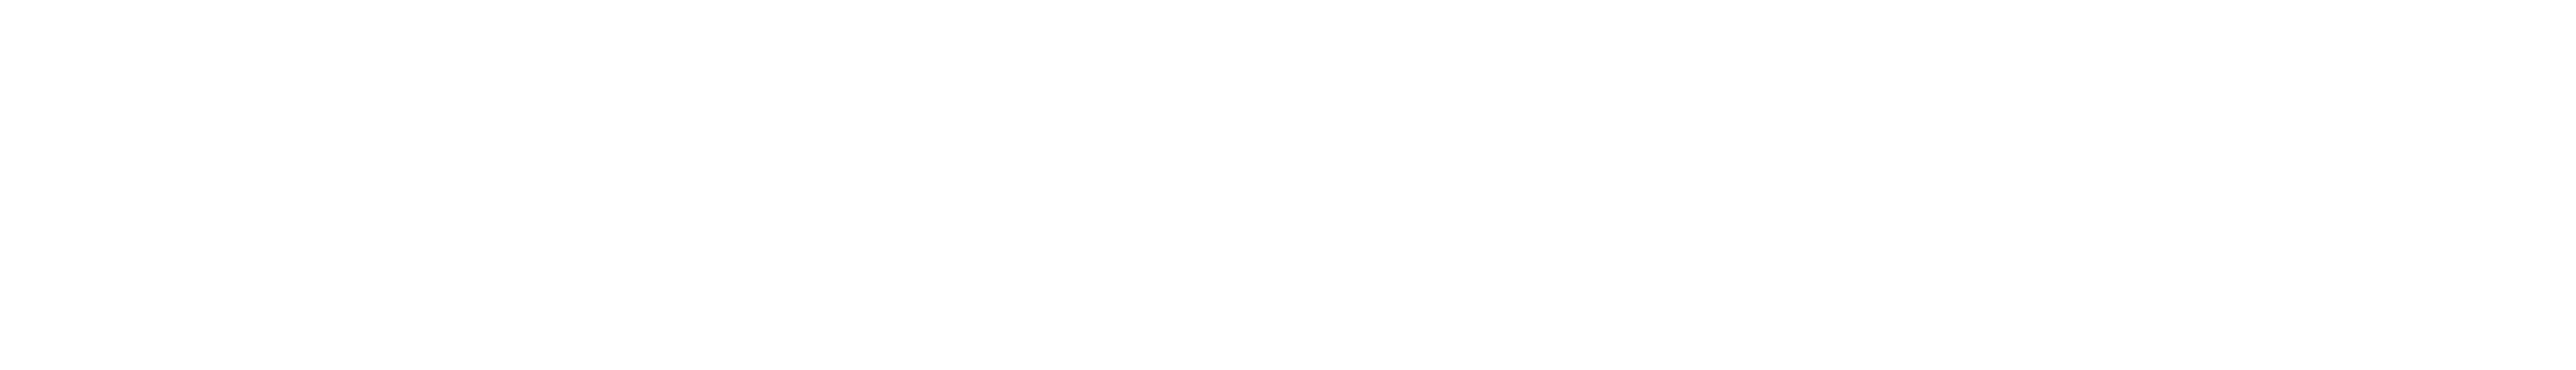 A black and white logo of the company one cent comfort.